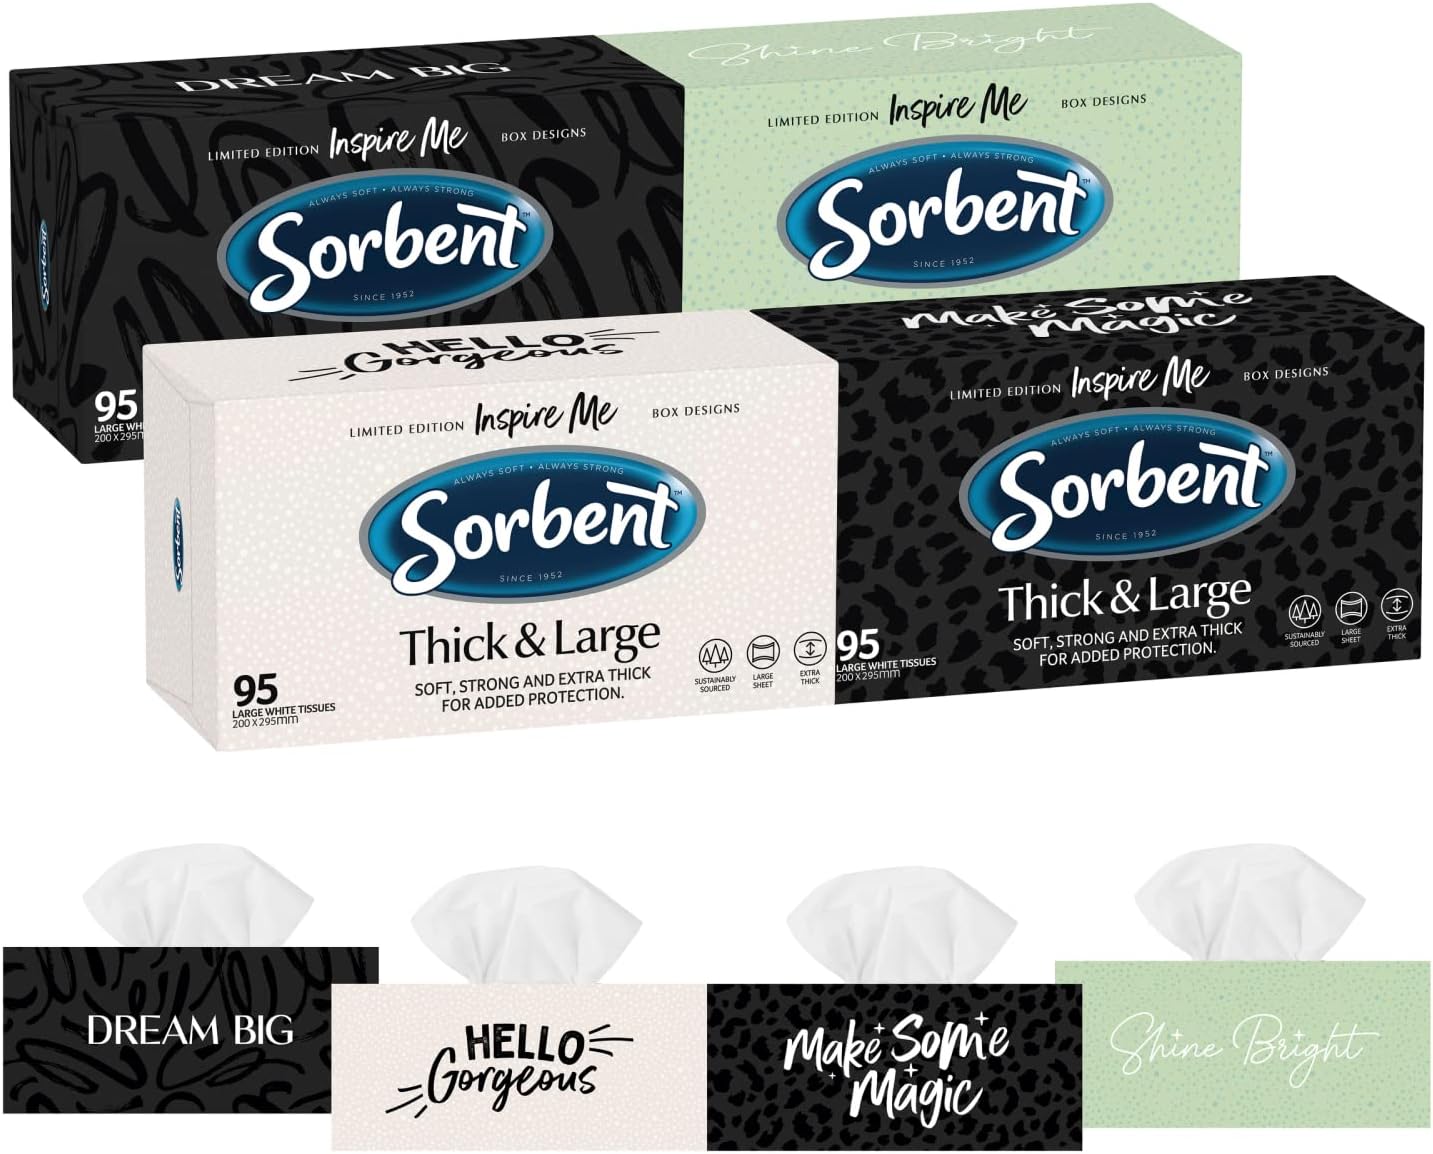 Sorbent Thick & Large White Tissue 12 Boxes X 95 Sheets